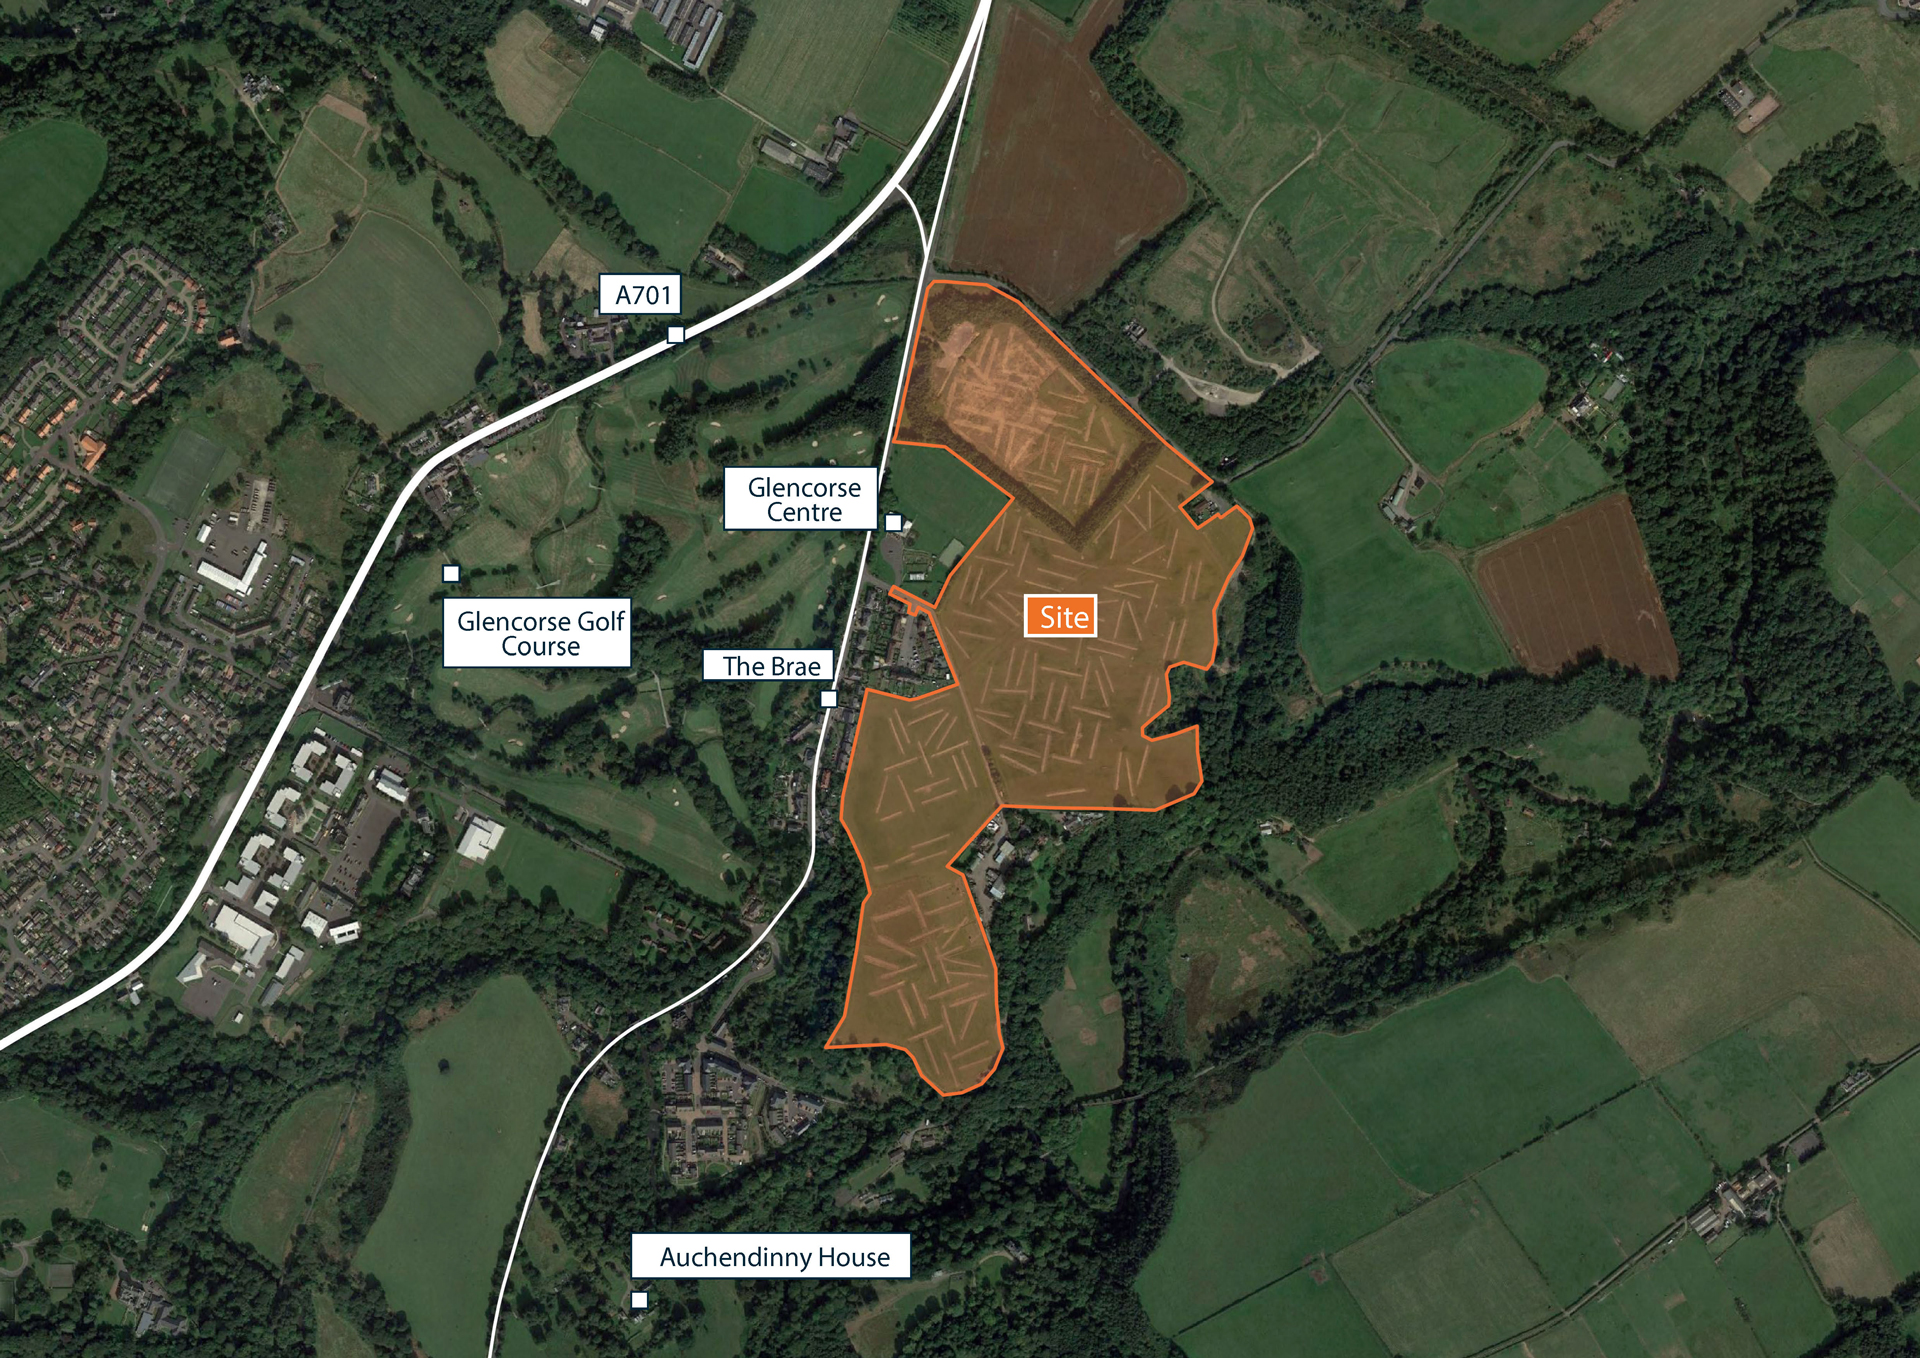 Bellway submits plans for 395 new Midlothian homes